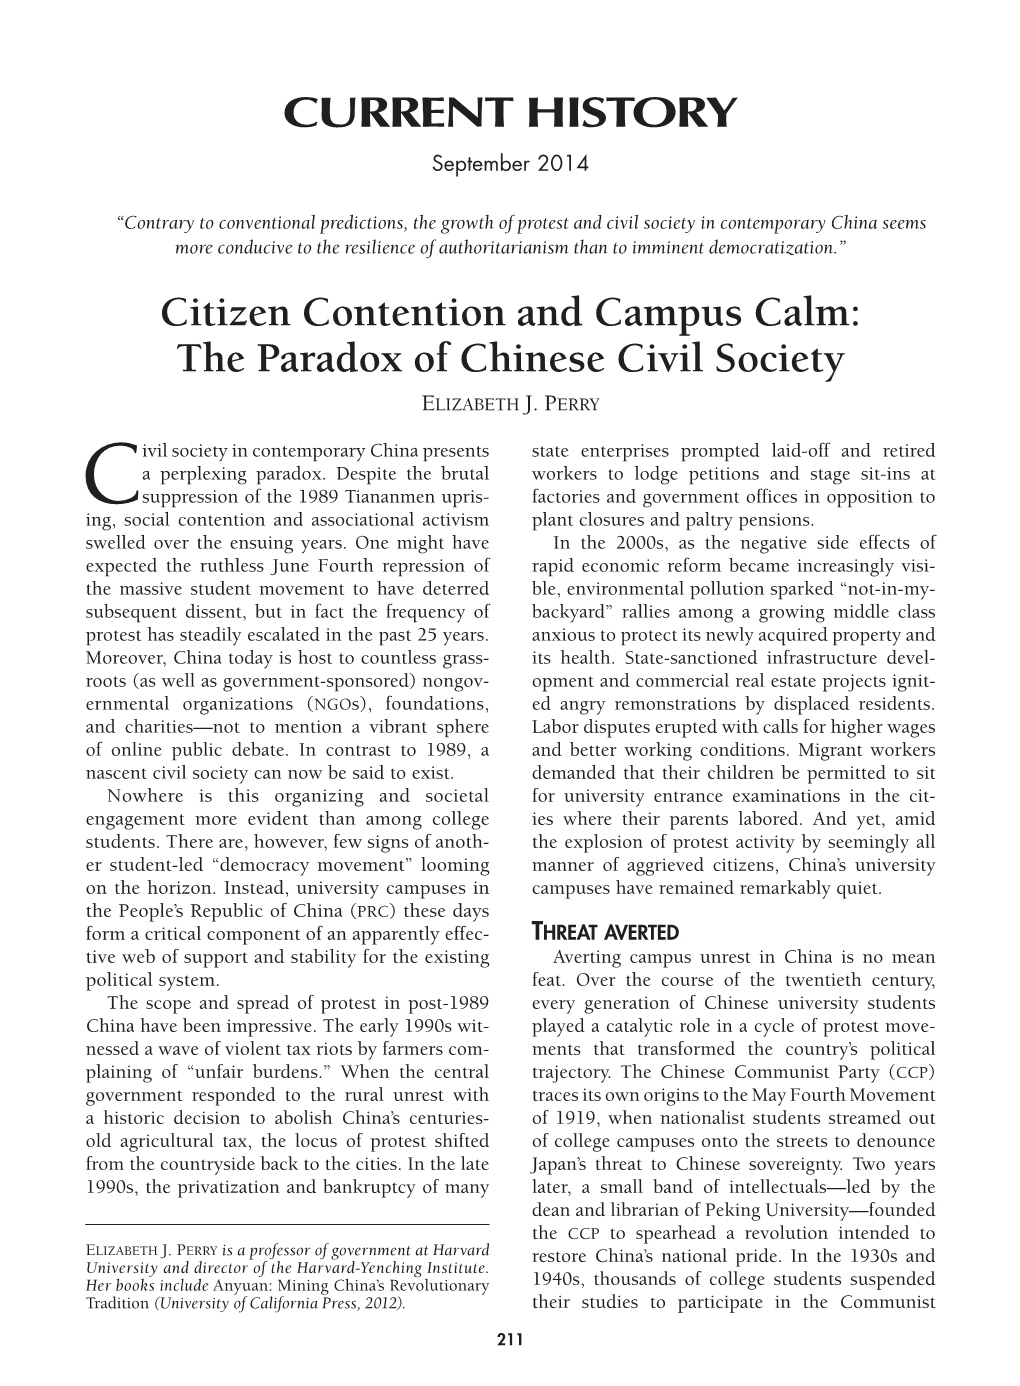 The Paradox of Chinese Civil Society CURRENT HISTORY